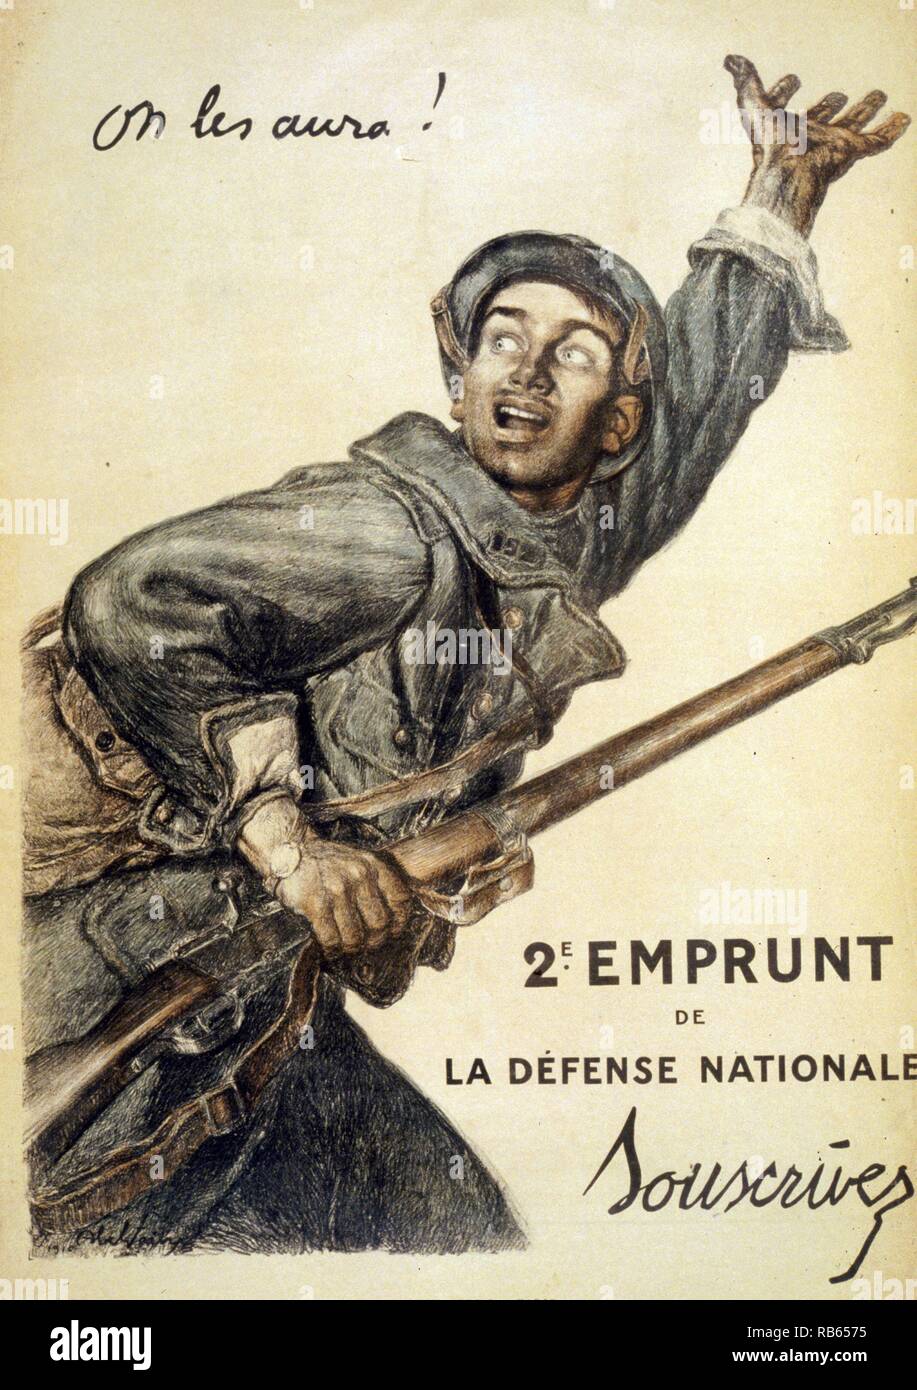 We'll get them! Subscribe to the 2nd National Defense Loan. A French soldier with a gun in one hand, and the other raised urging his comrades on. This is the most remembered French poster produced during the war. Stock Photo